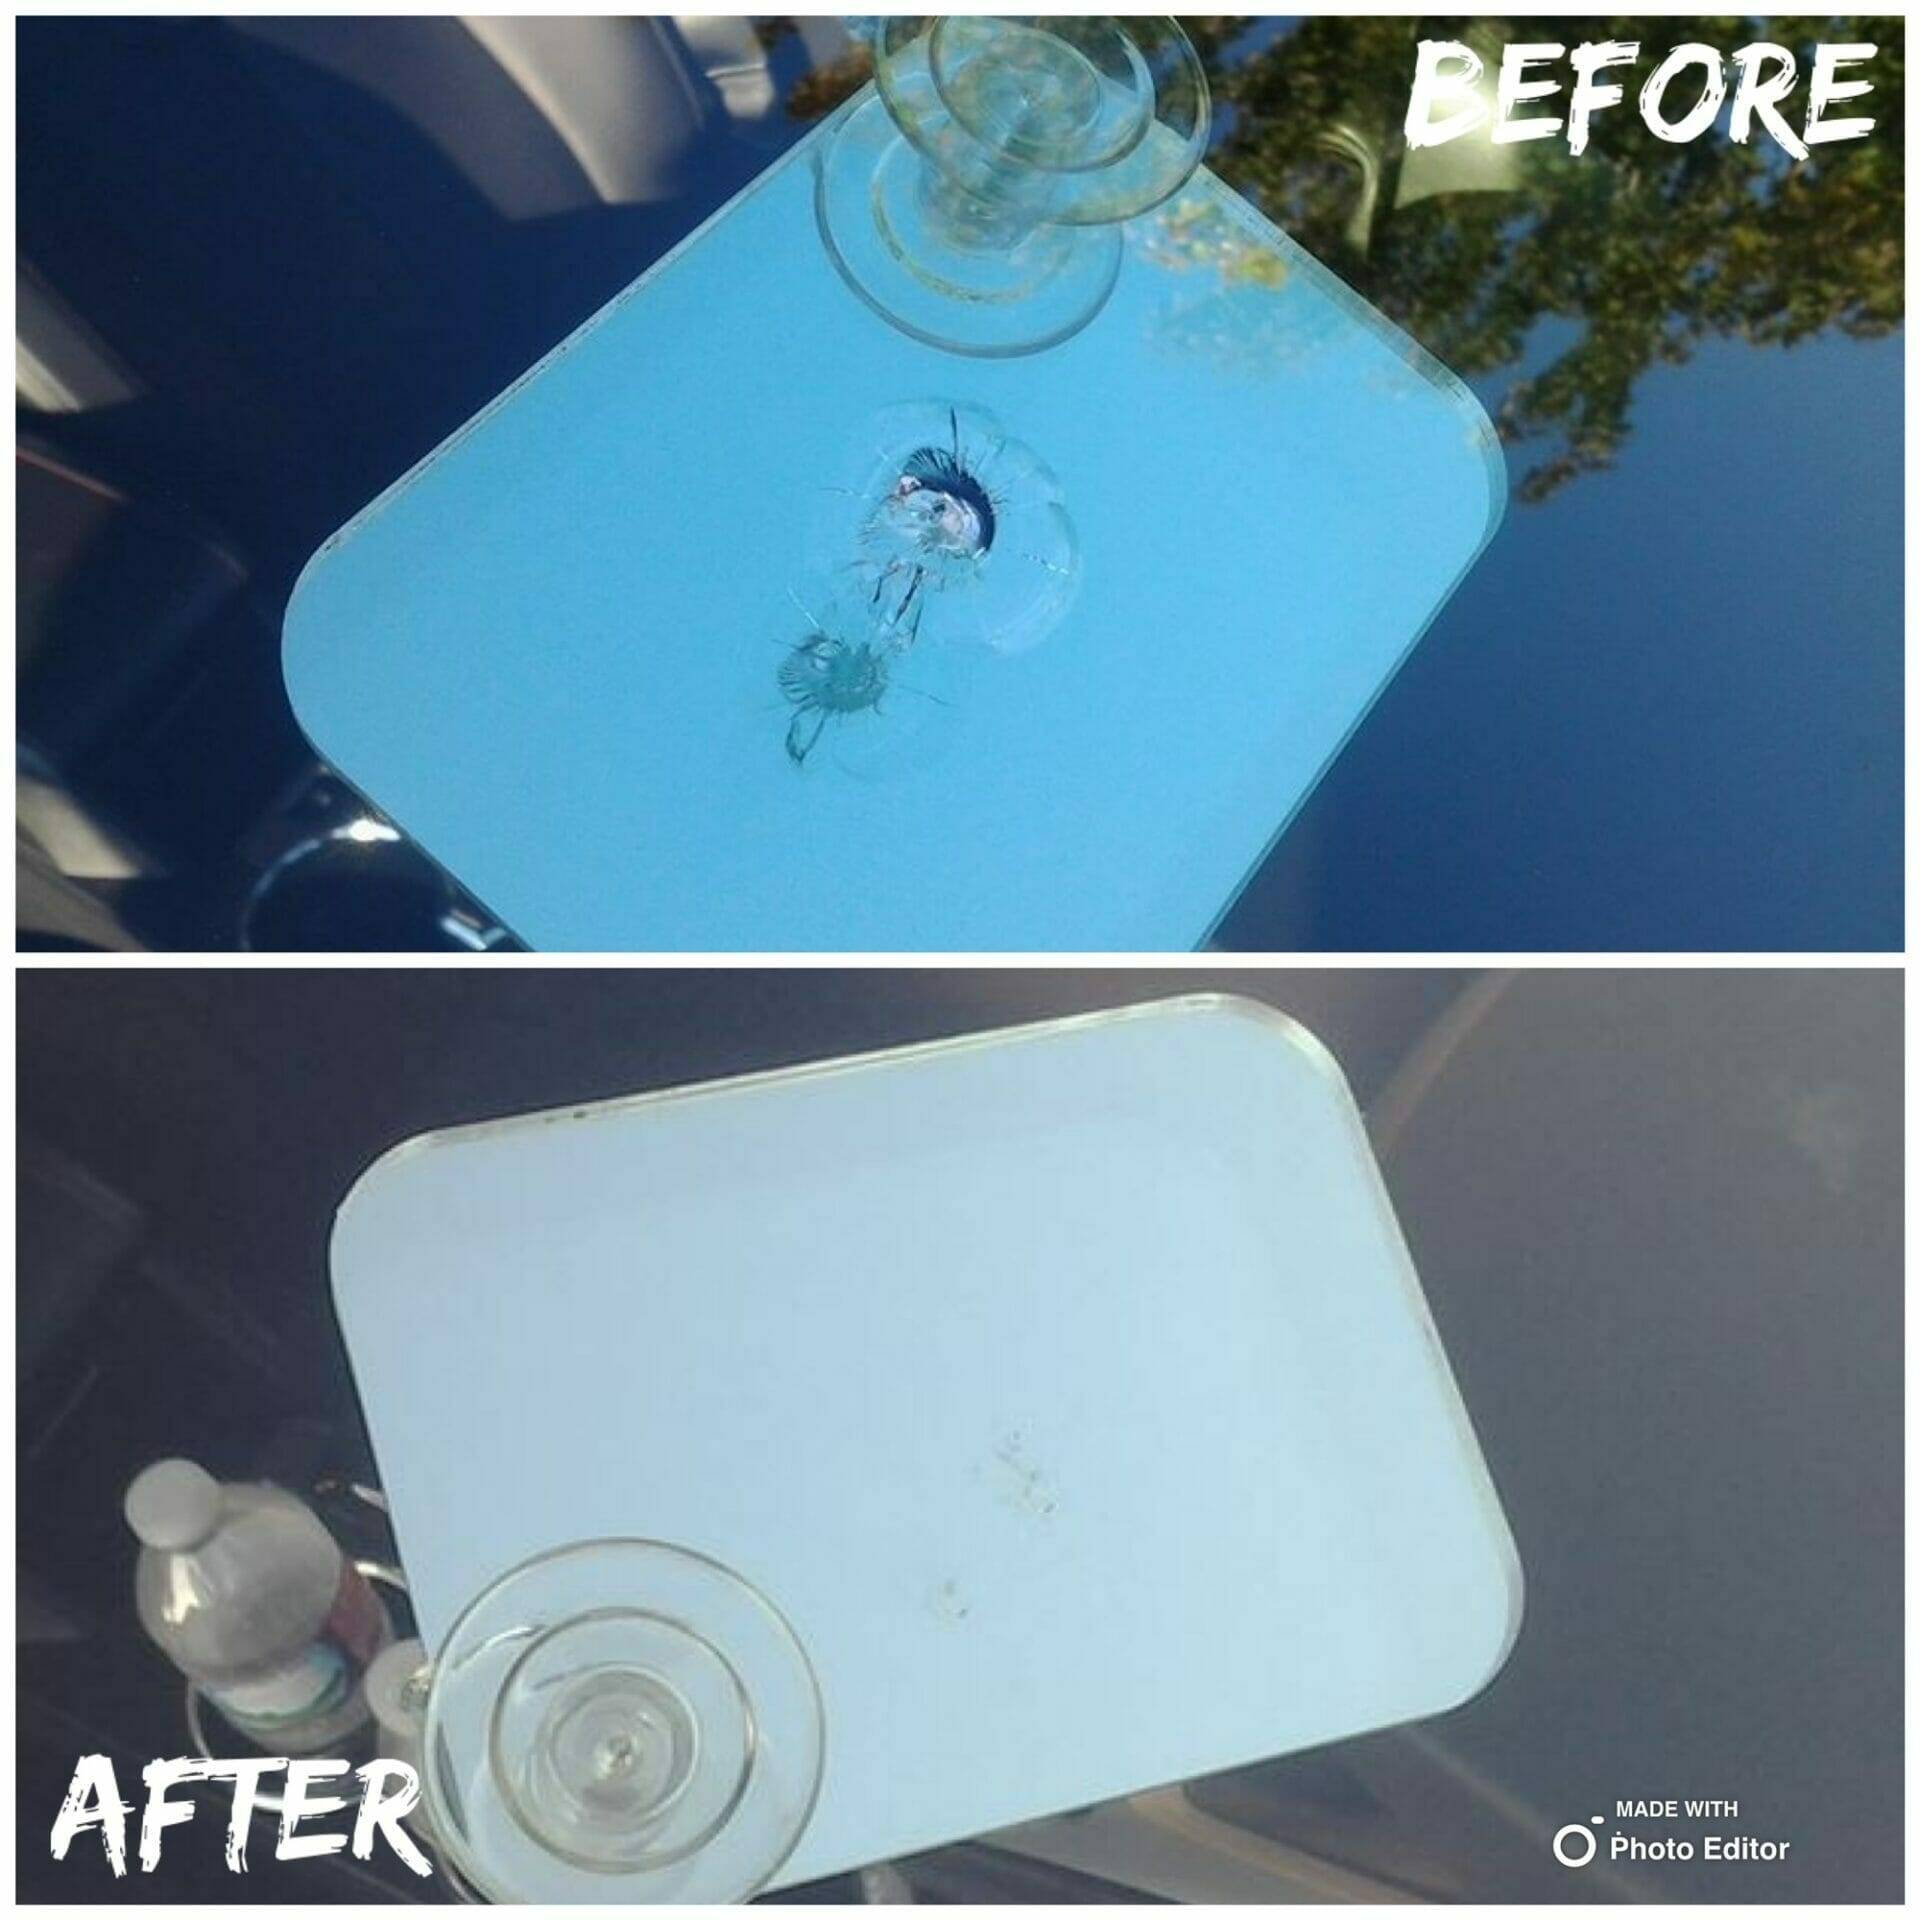 This before and after image showcases our windshield repair work on a 14 Honda Civic Sedan in Shavano Park, Texas. The top half of the image shows the initial condition of the windshield, bearing a prominent rock chip. The lower half reveals the windshield post-repair, with the previous damage expertly addressed and no longer visible, demonstrating our commitment to delivering superior windshield repair services.